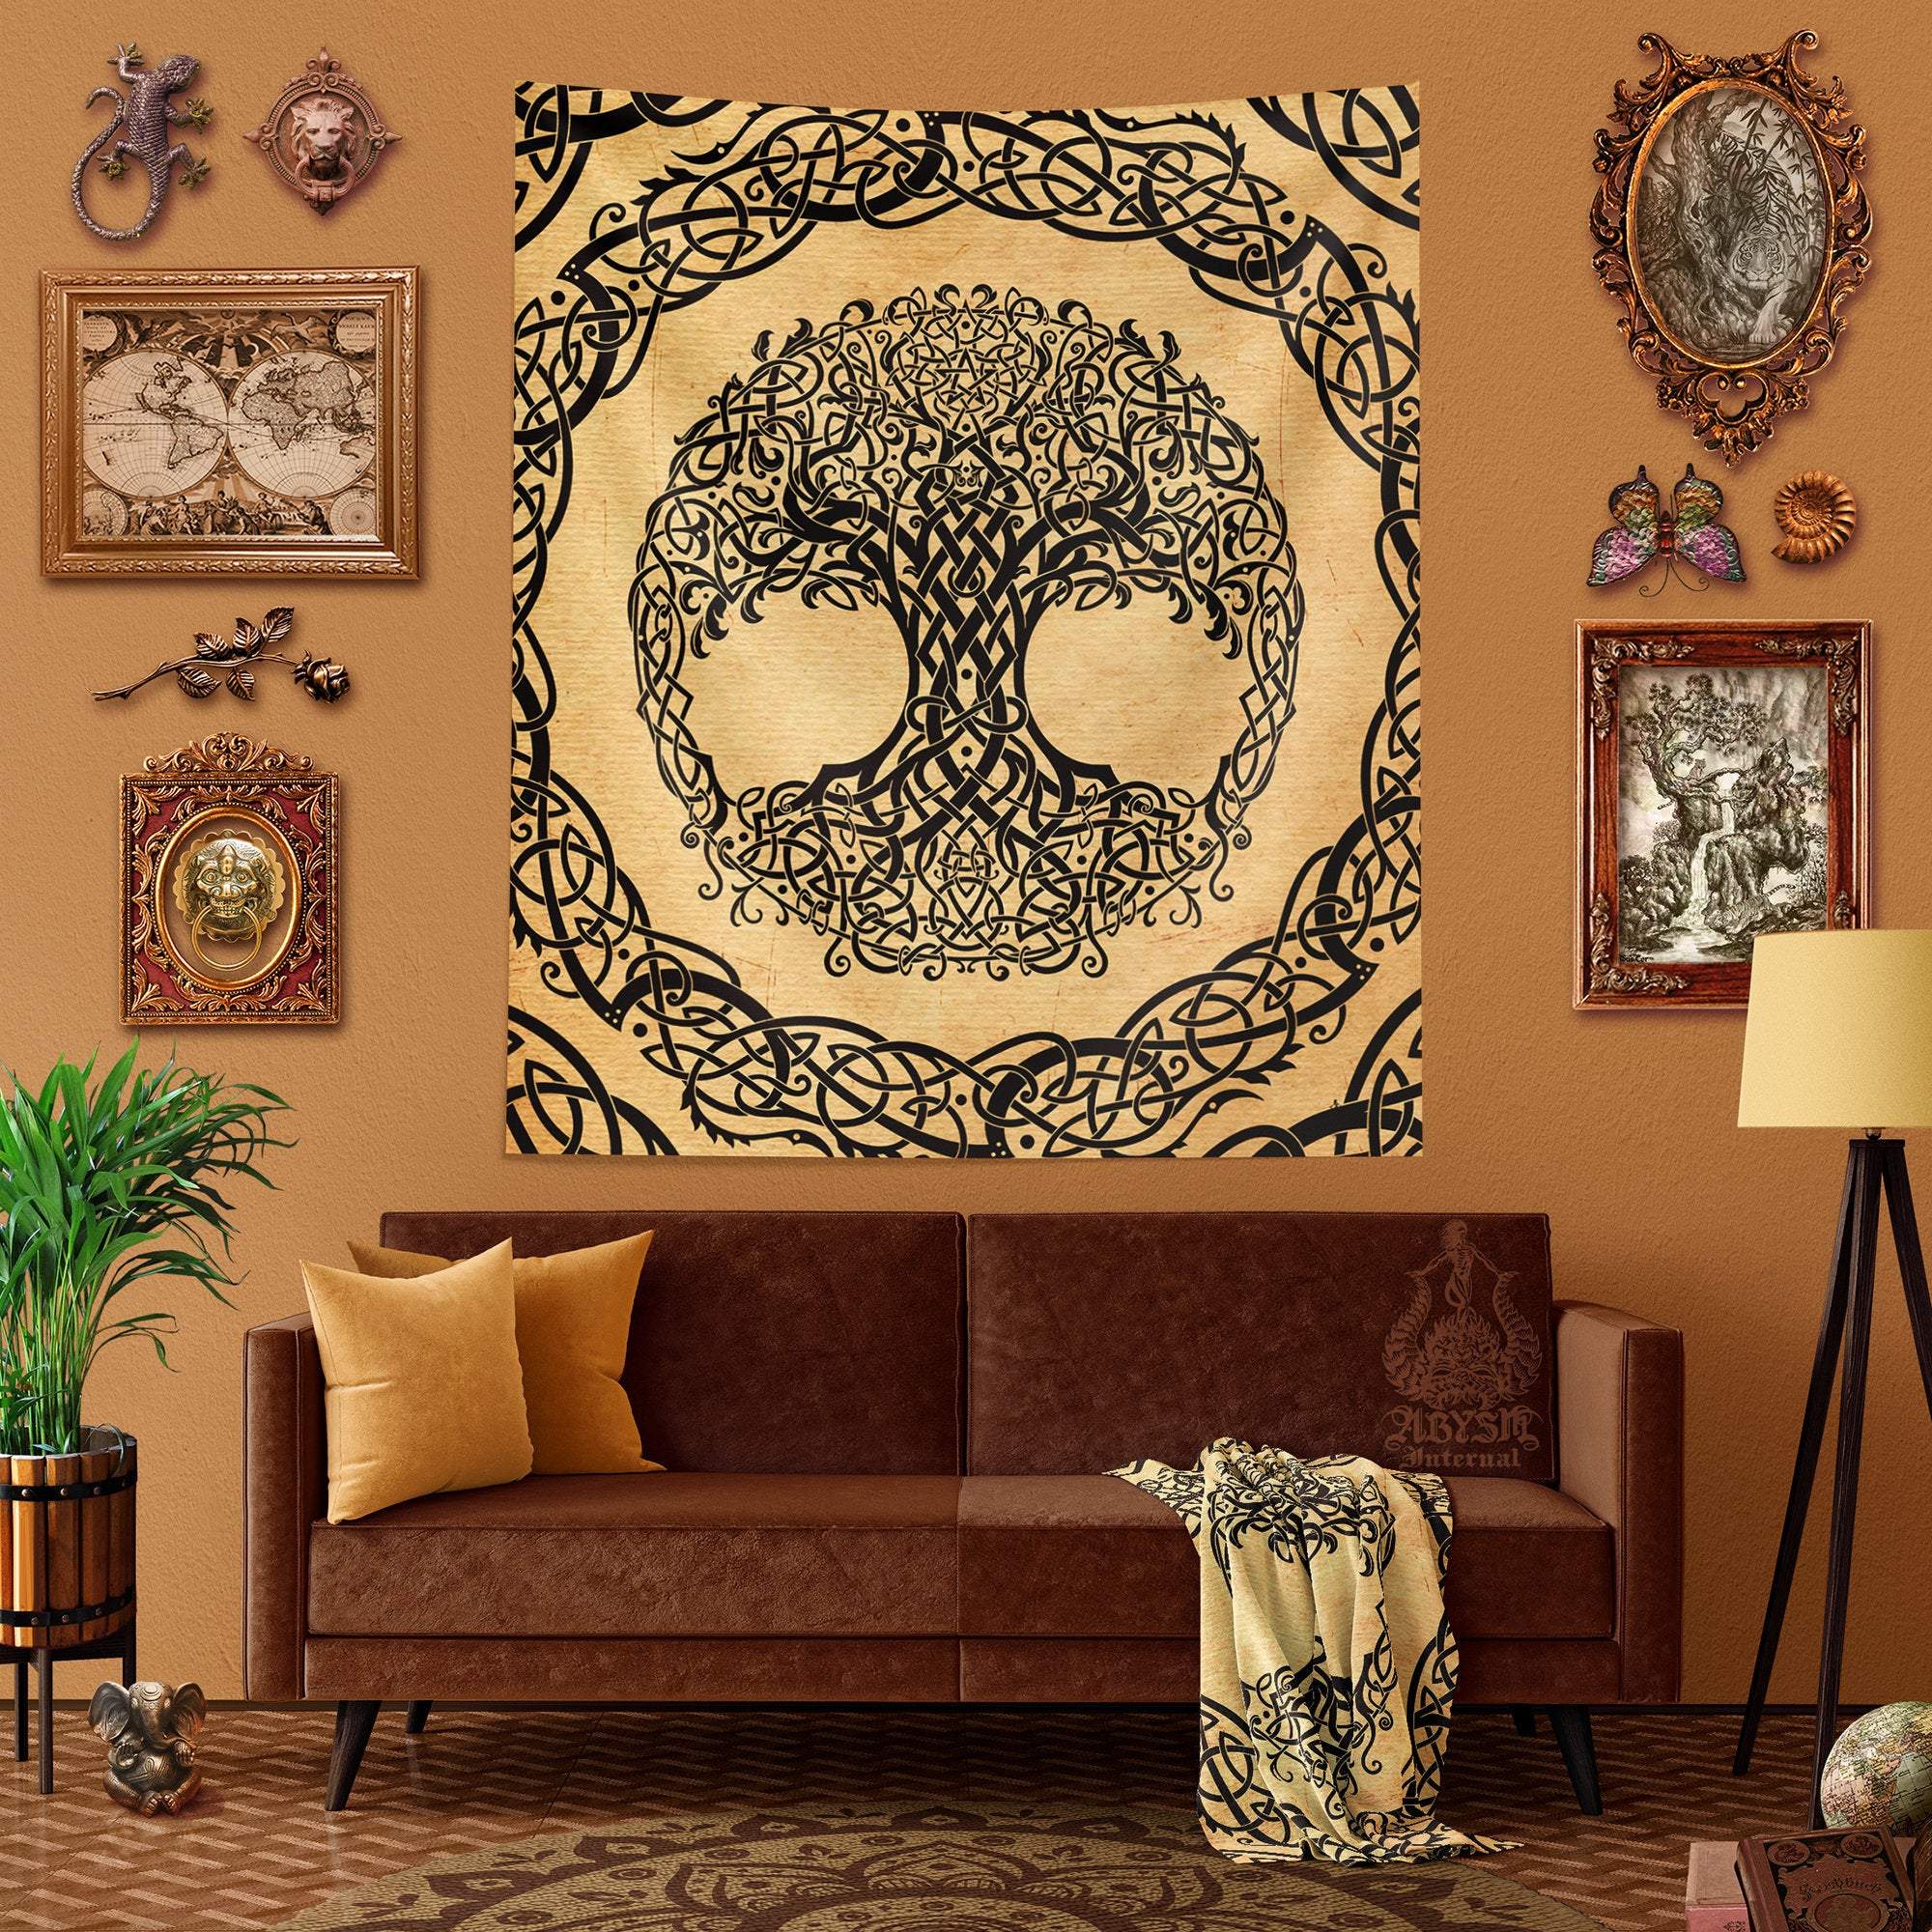 Tree of Life Tapestry, Celtic Wall Hanging, Pagan and Boho and Indie Home Decor, Art Print, Eclectic and Funky - Paper - Abysm Internal